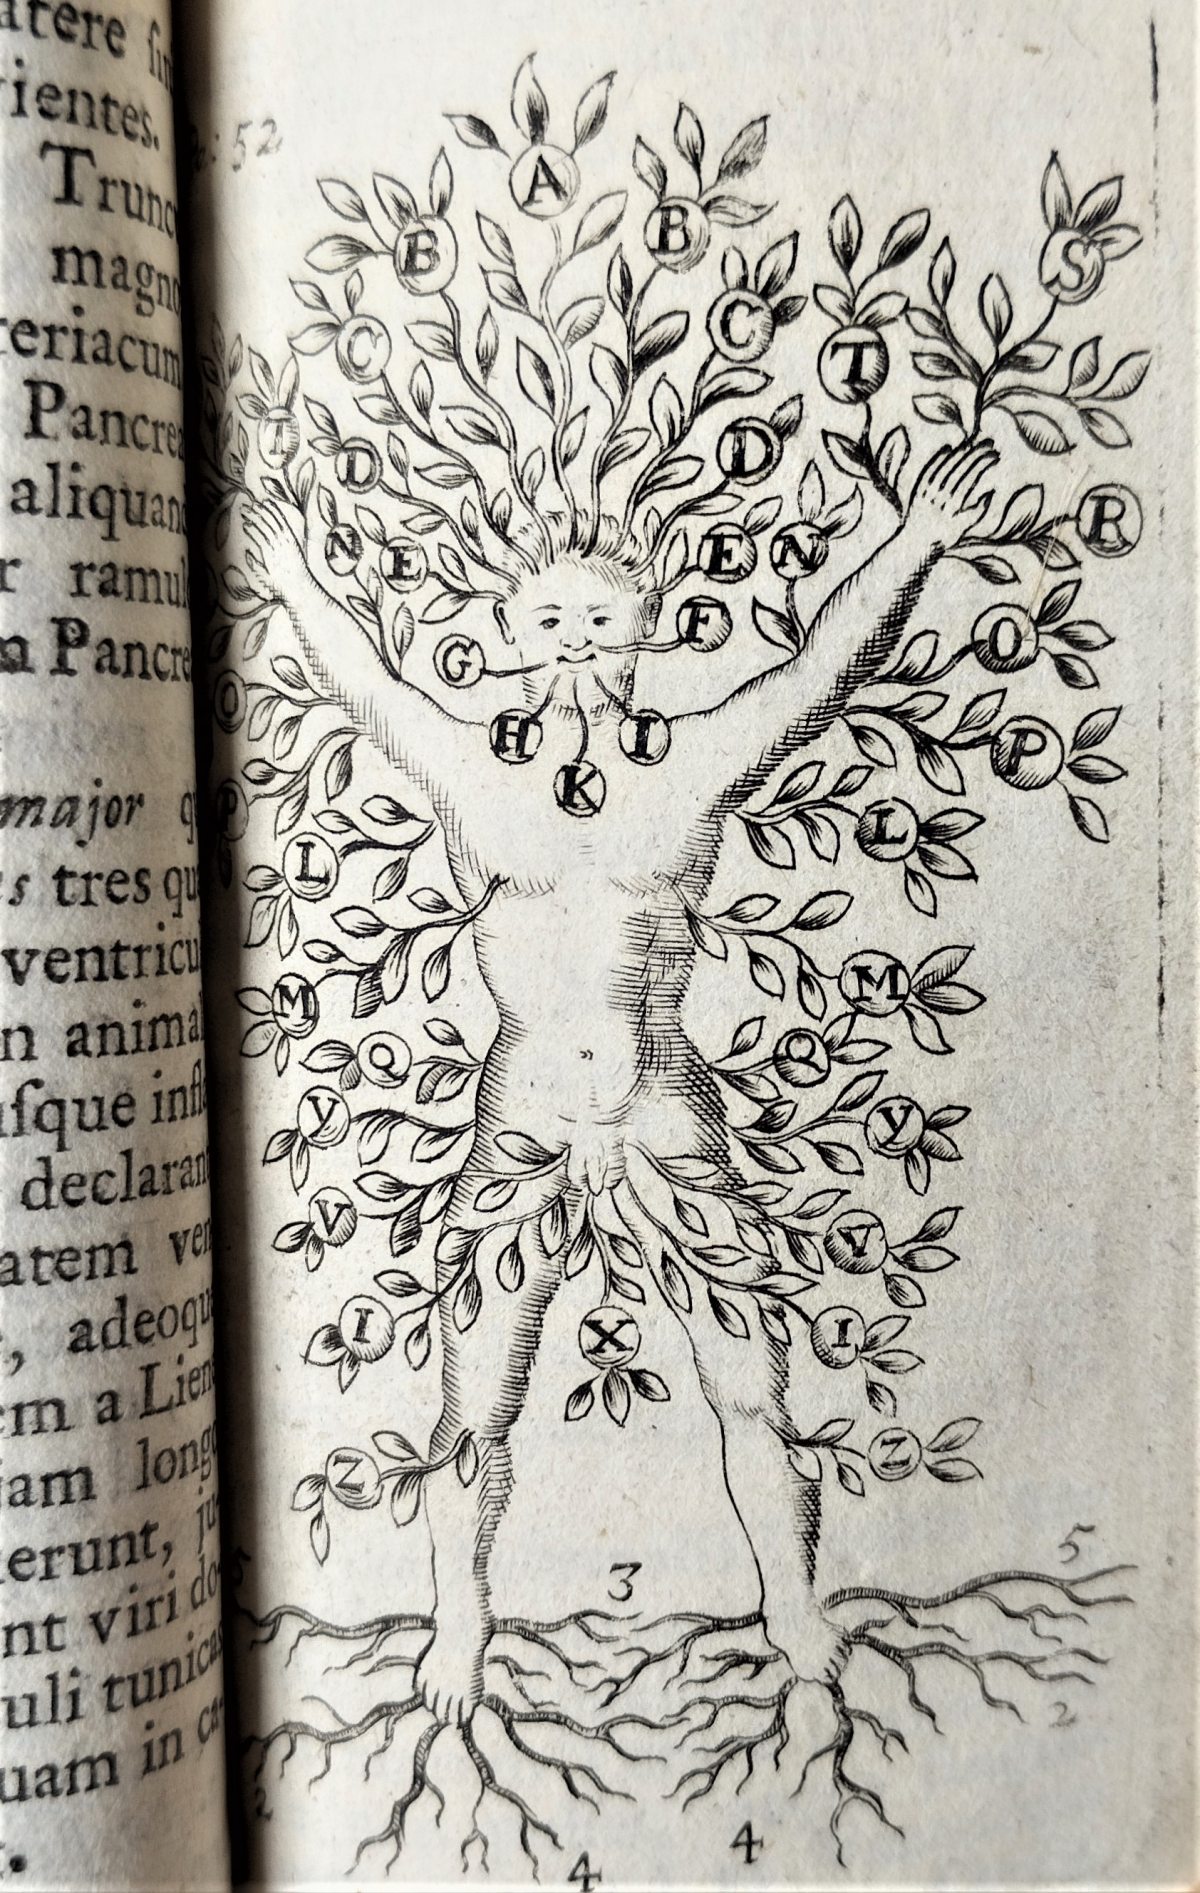 Human figure with branches and leaves coming off its arms and roots from its feet. 